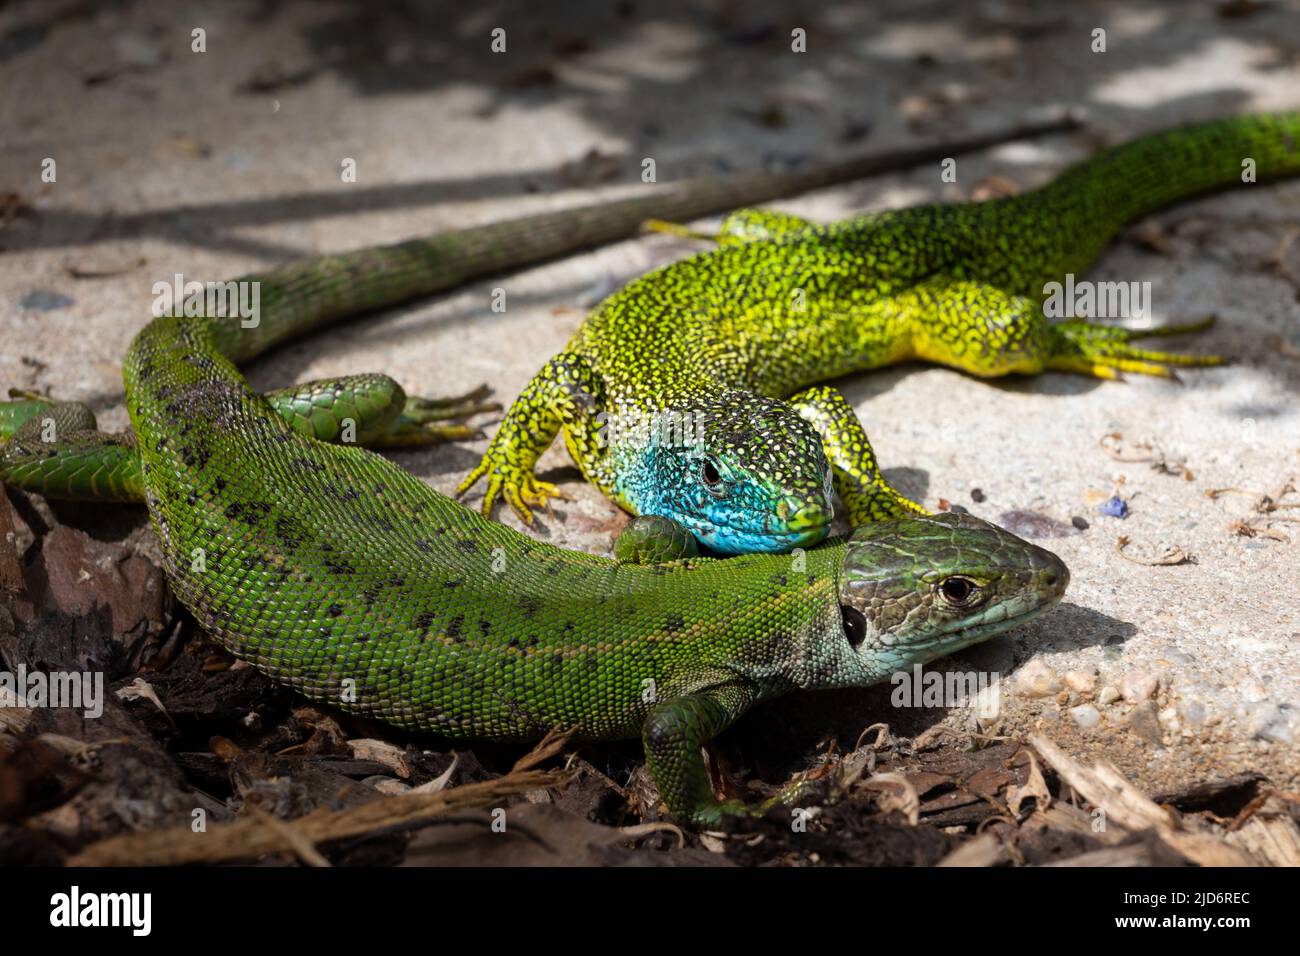 Close-up of a male and female green lizard couple (Lacerta bilineata or Lacerta vivipara, Smaragdeidechse) on a stone. Focus on male lizard with its h Stock Photo